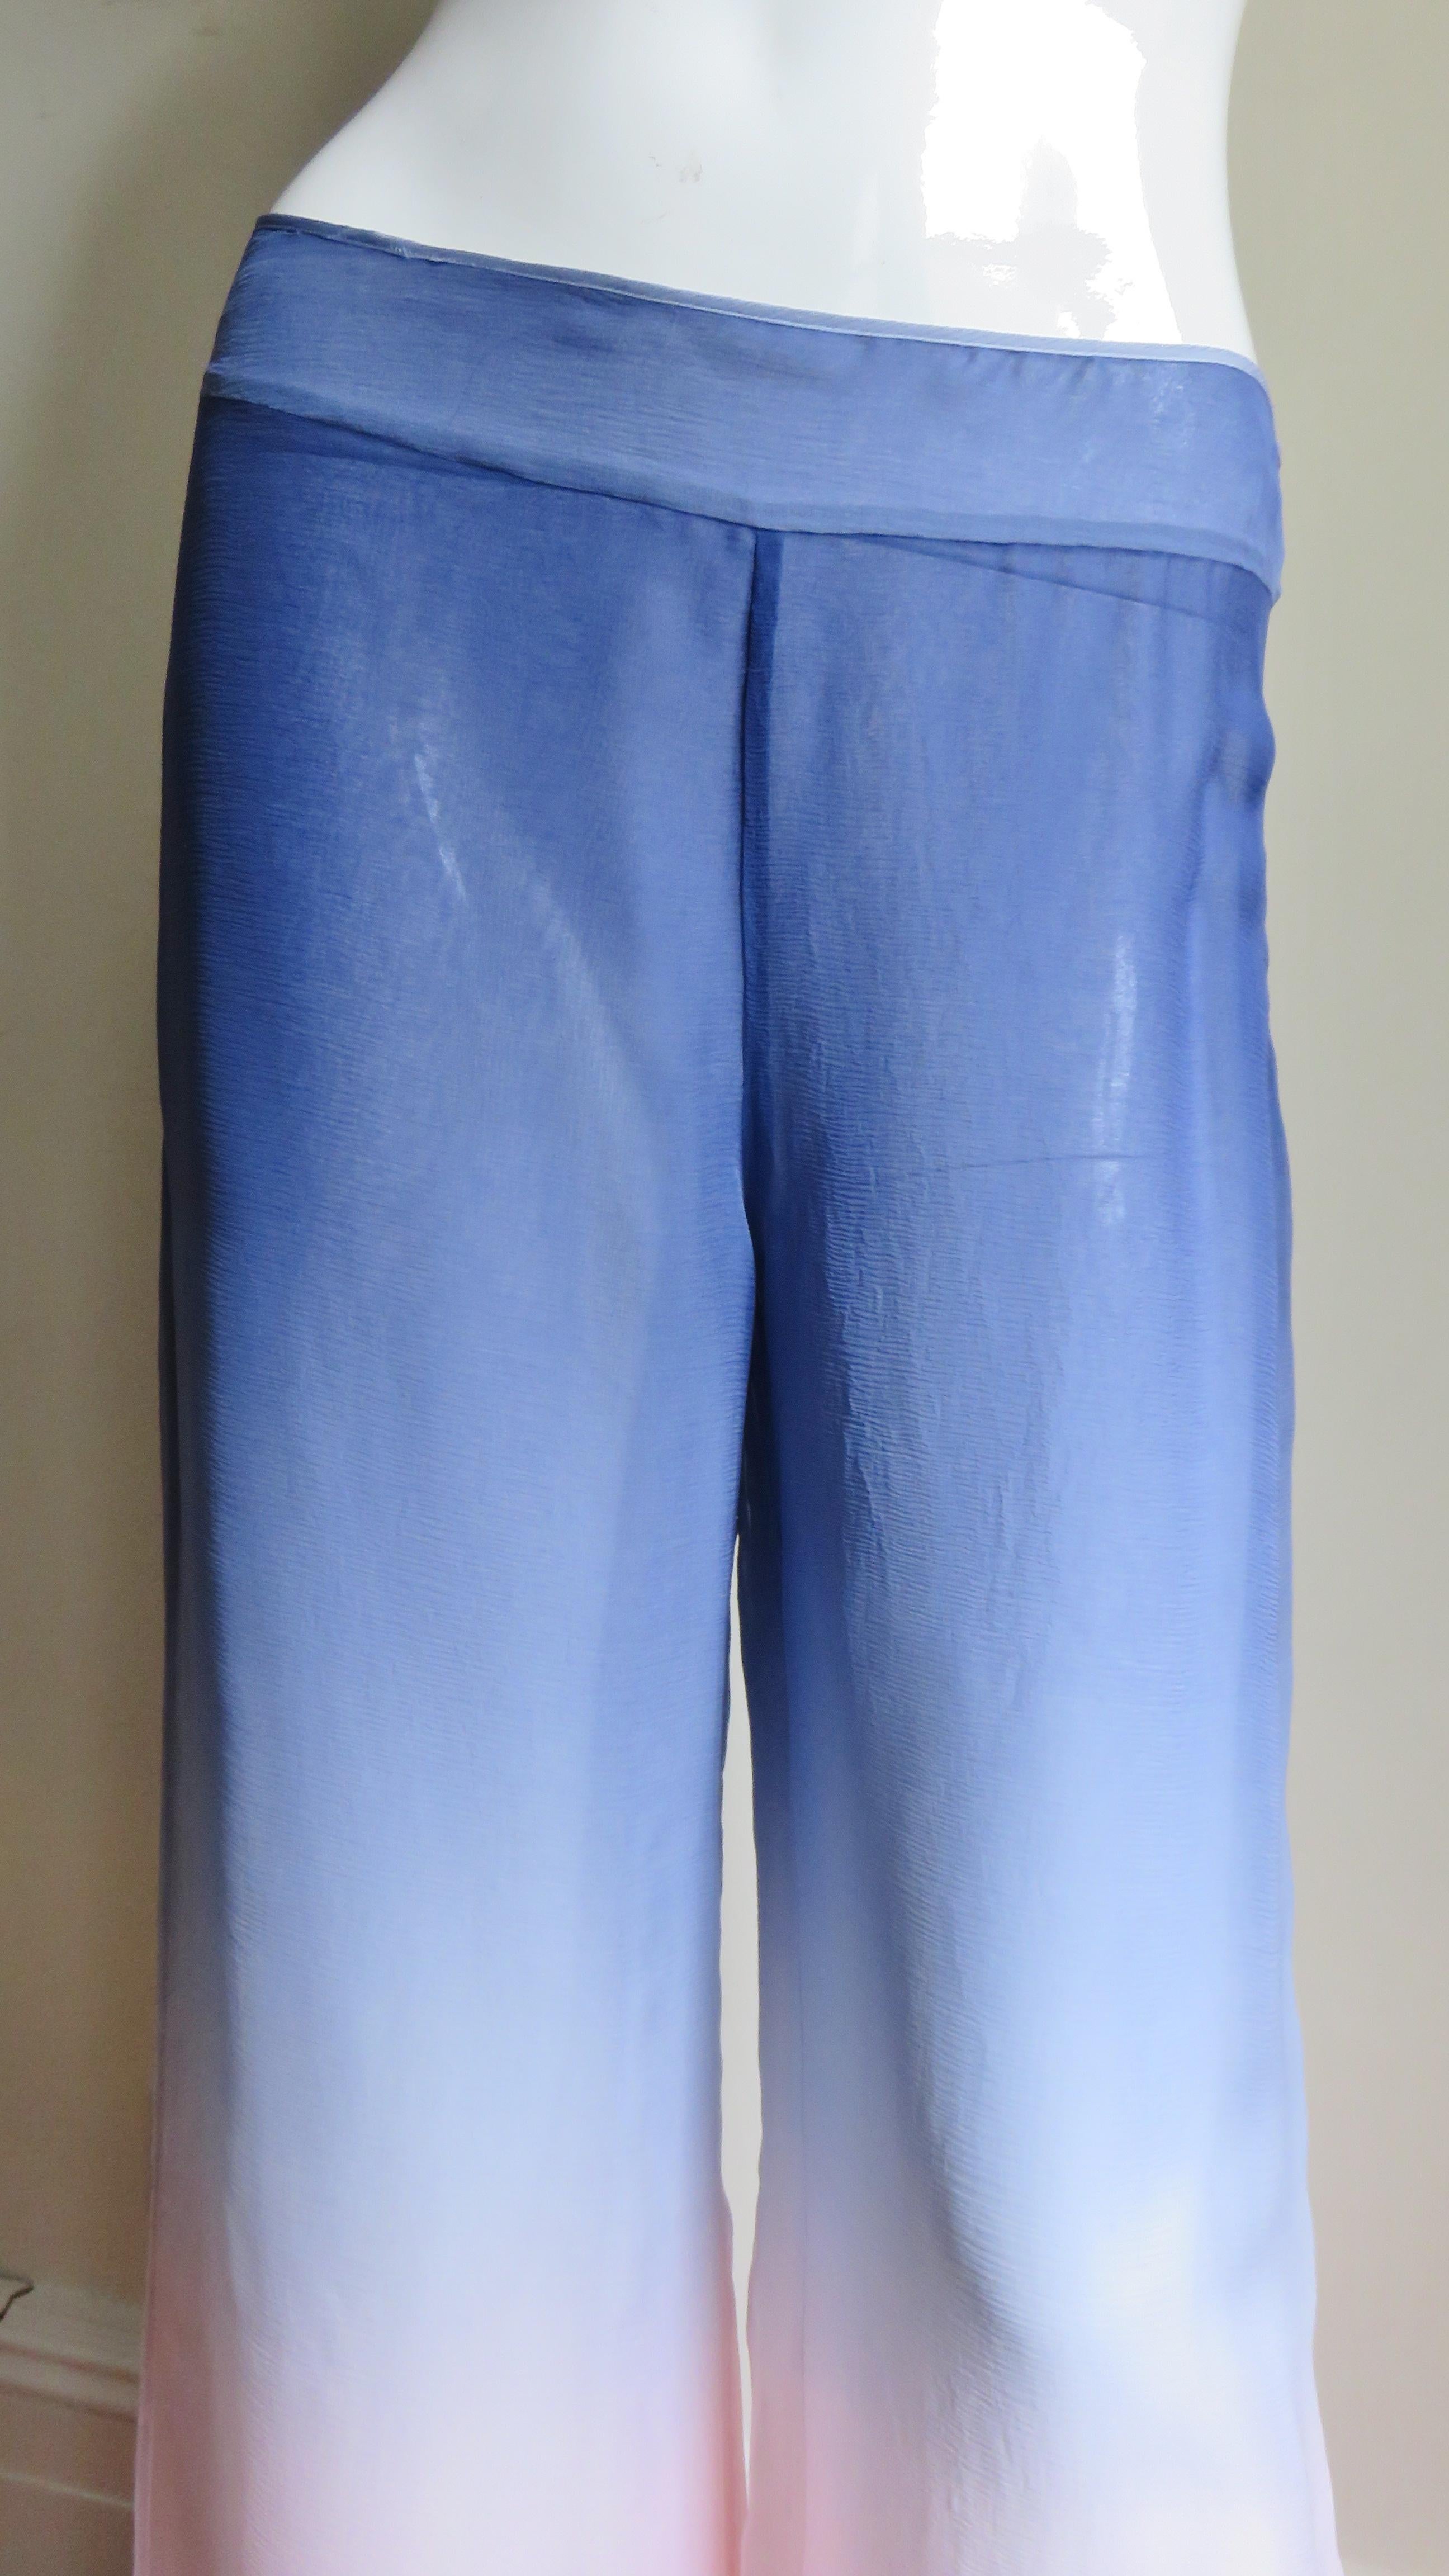 Beautiful wide leg silk pants from Emilio Pucci.  They consist of 2 layers of ombre silk starting with blue at the waistband lightening, melting into pink from the knees to the hem.  The have wide legs, a waistband and a side zipper.  
Unworn